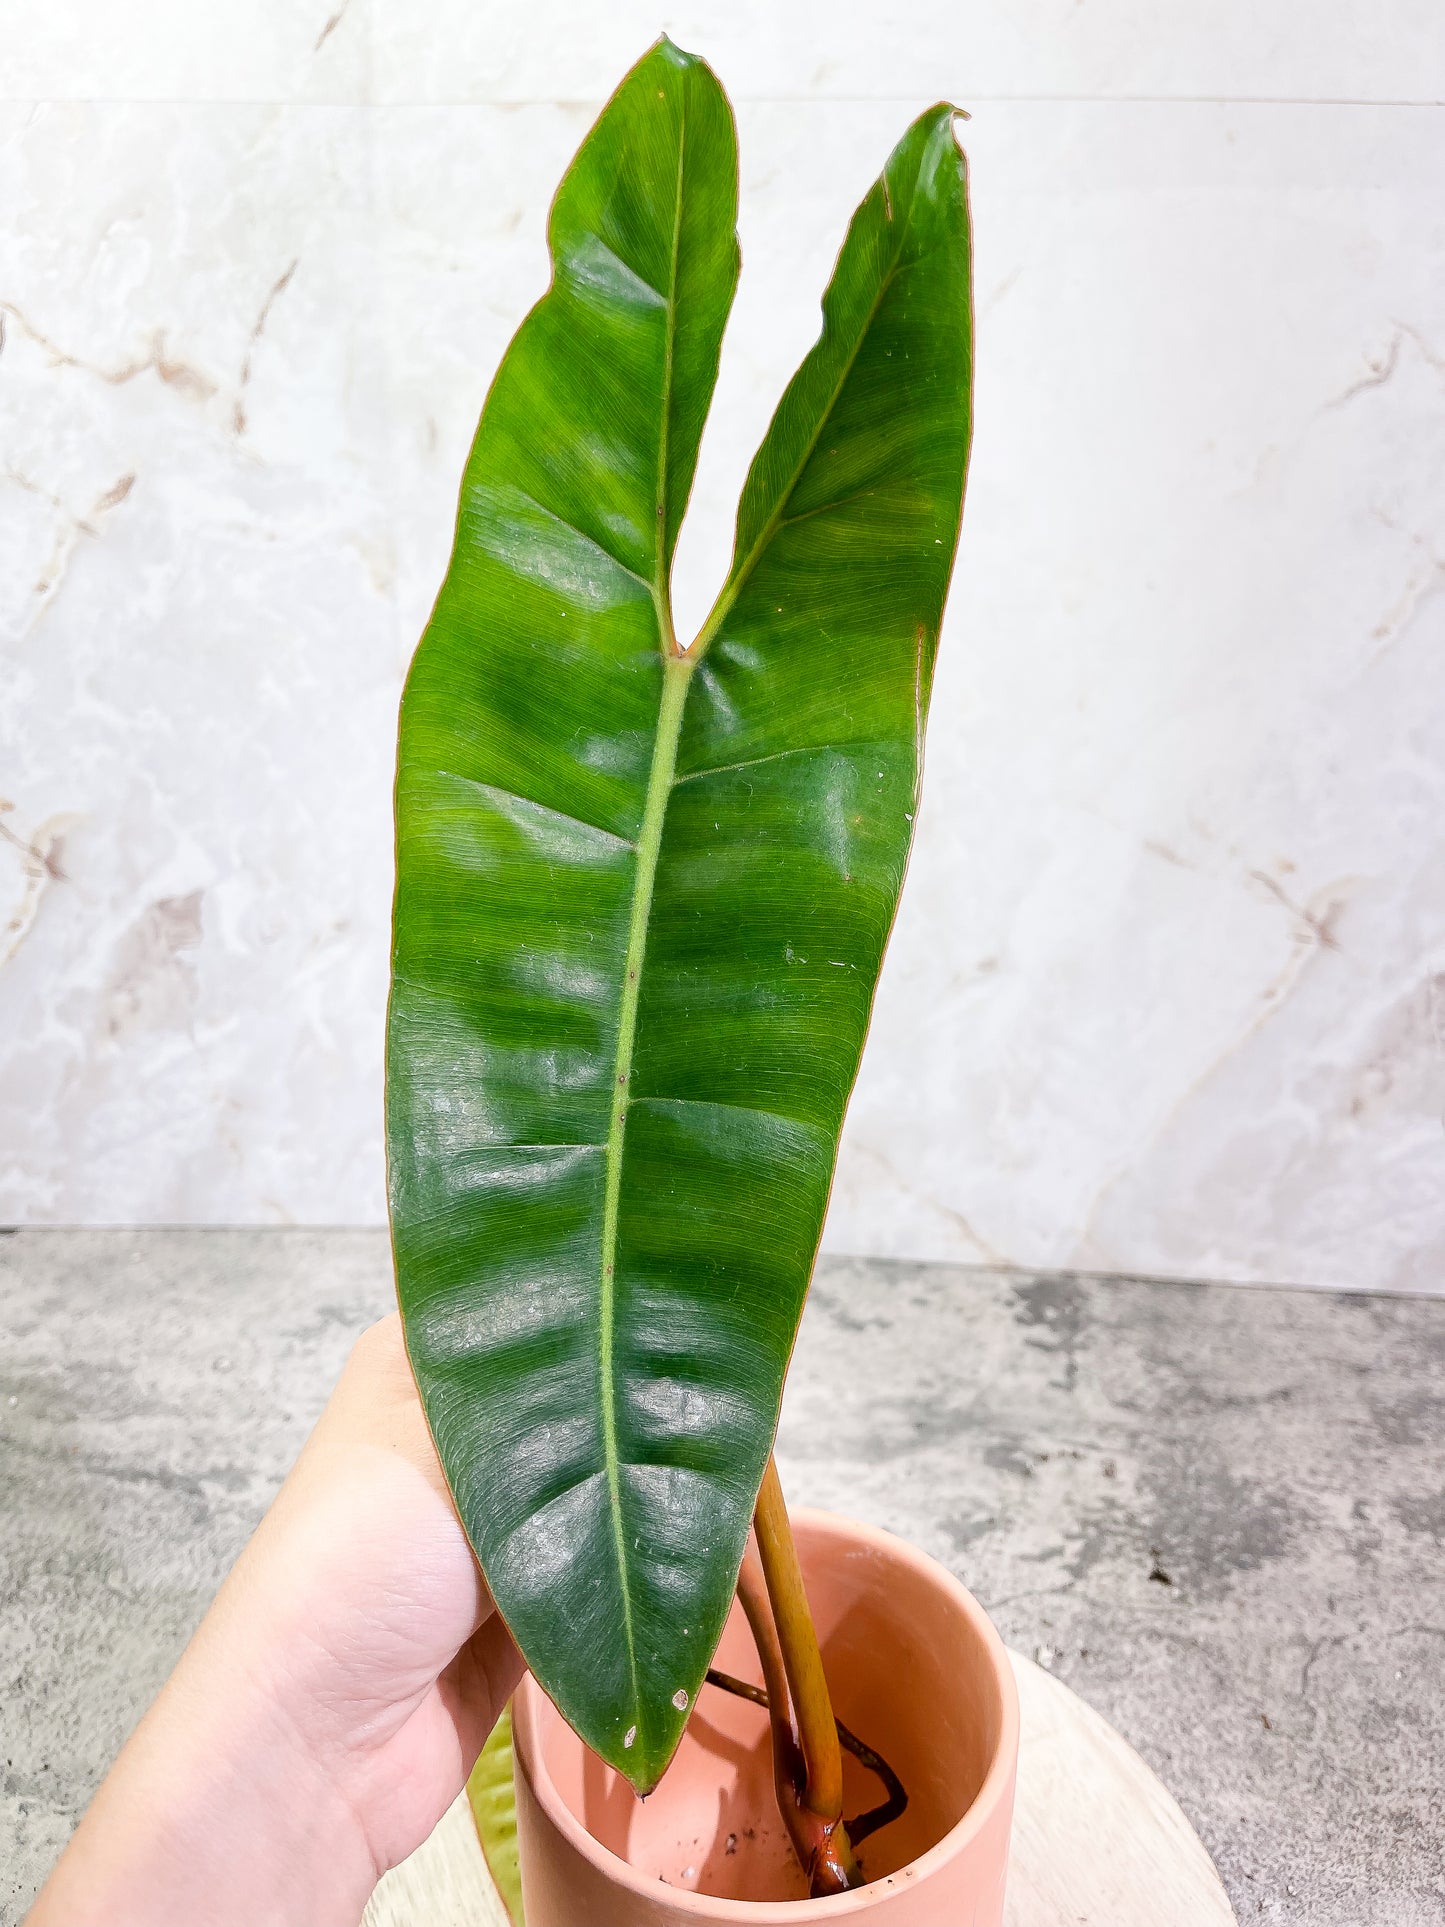 Philodendron Billietiae cutting with 2 leaves and 1 sprout slightly rooted top cutting